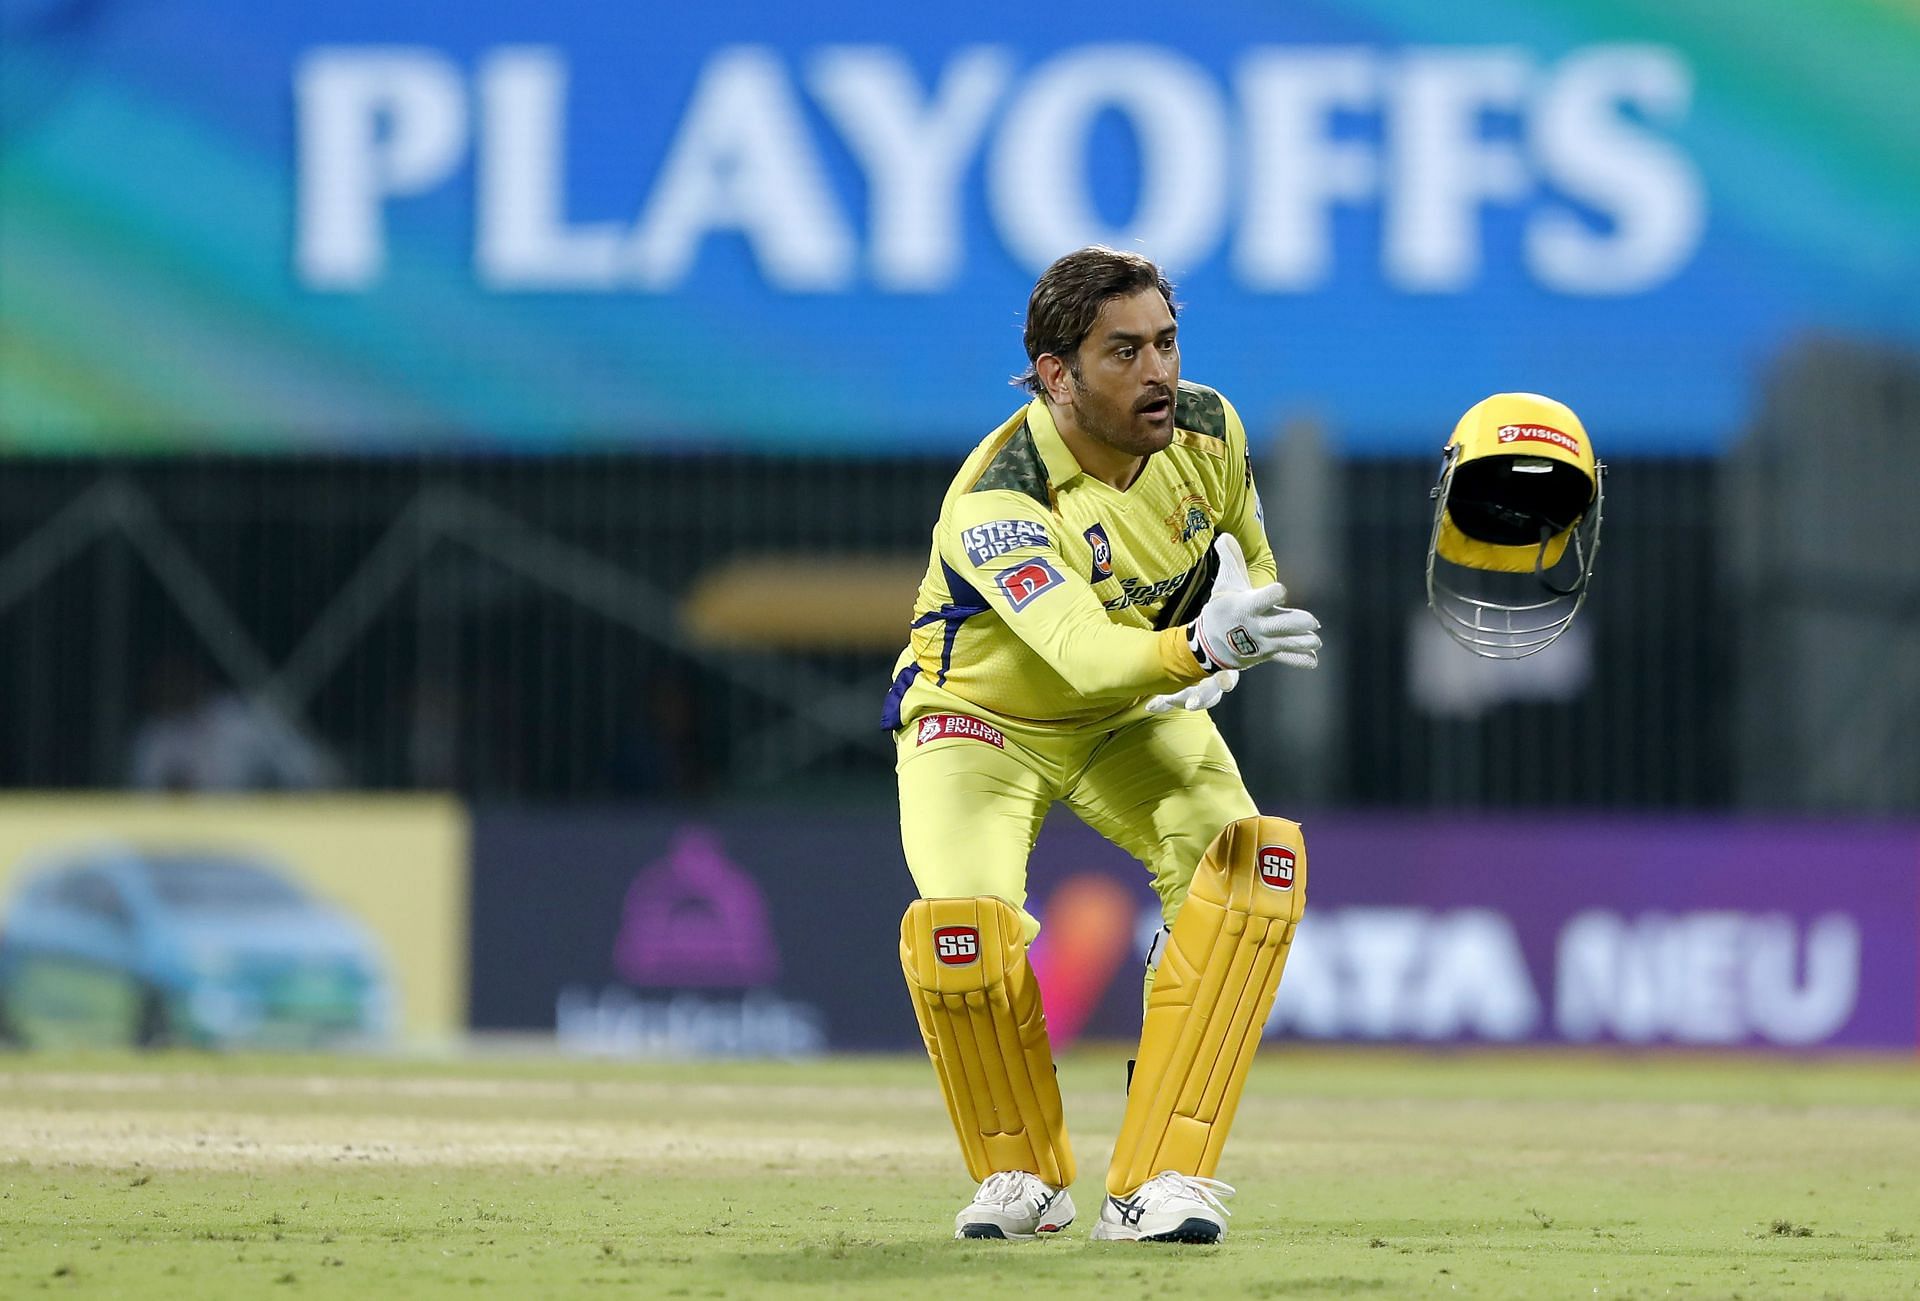 MS Dhoni continues to captain Chennai Super Kings in the IPL. (Pic: Getty Images)